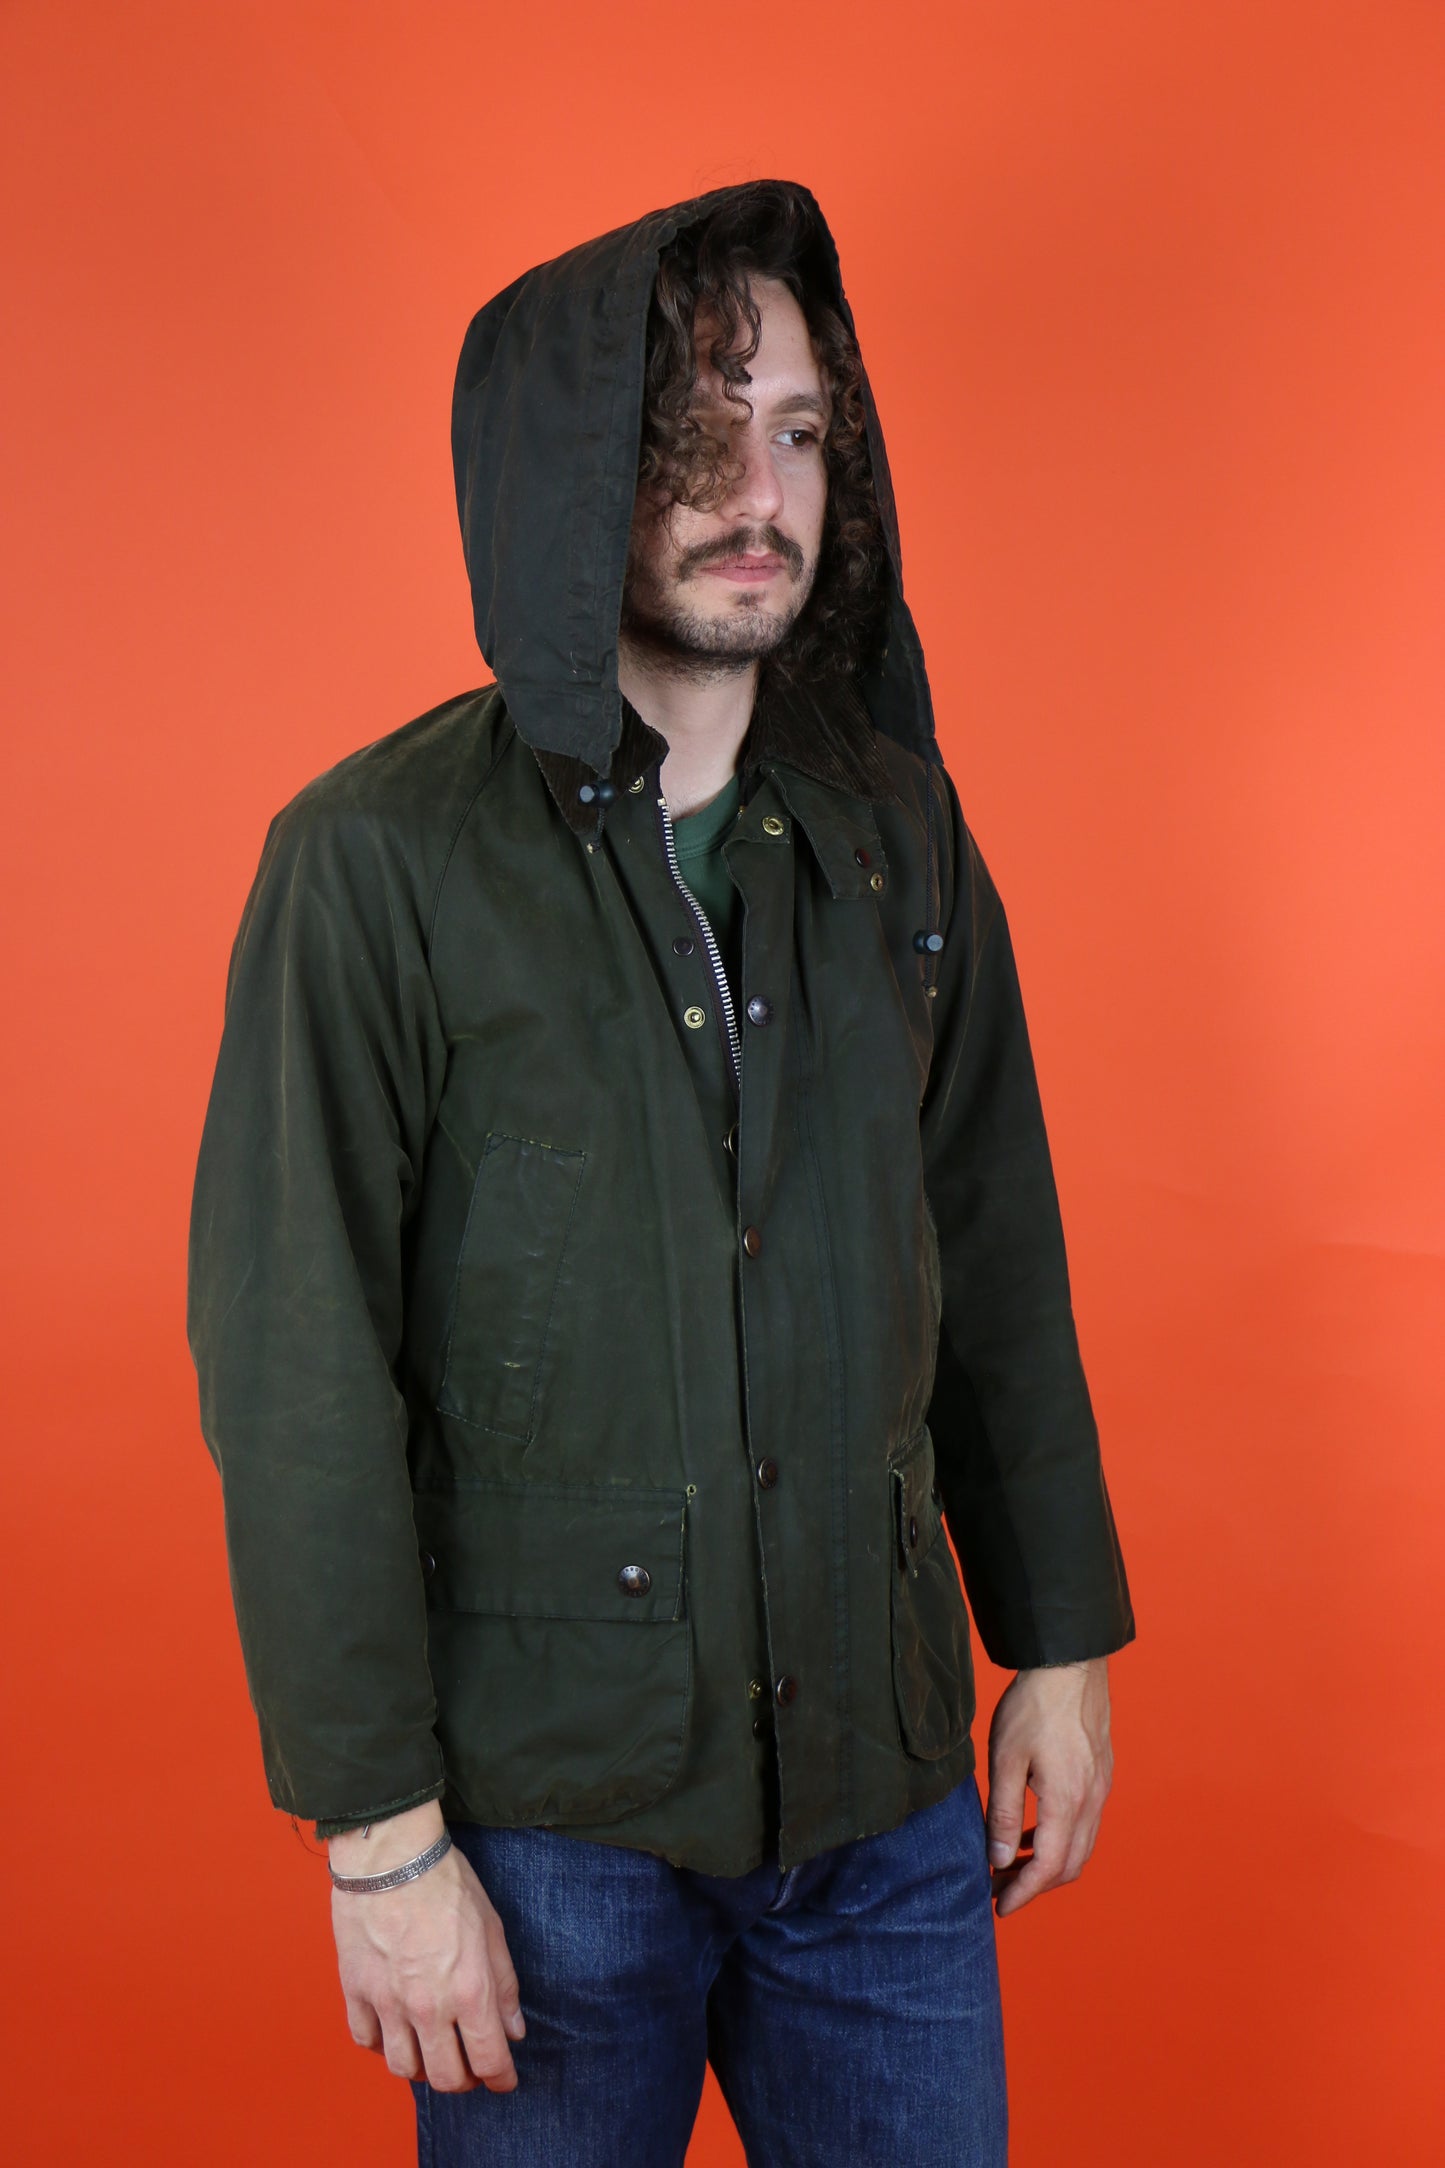 Barbour With Hood - vintage clothing clochard92.com